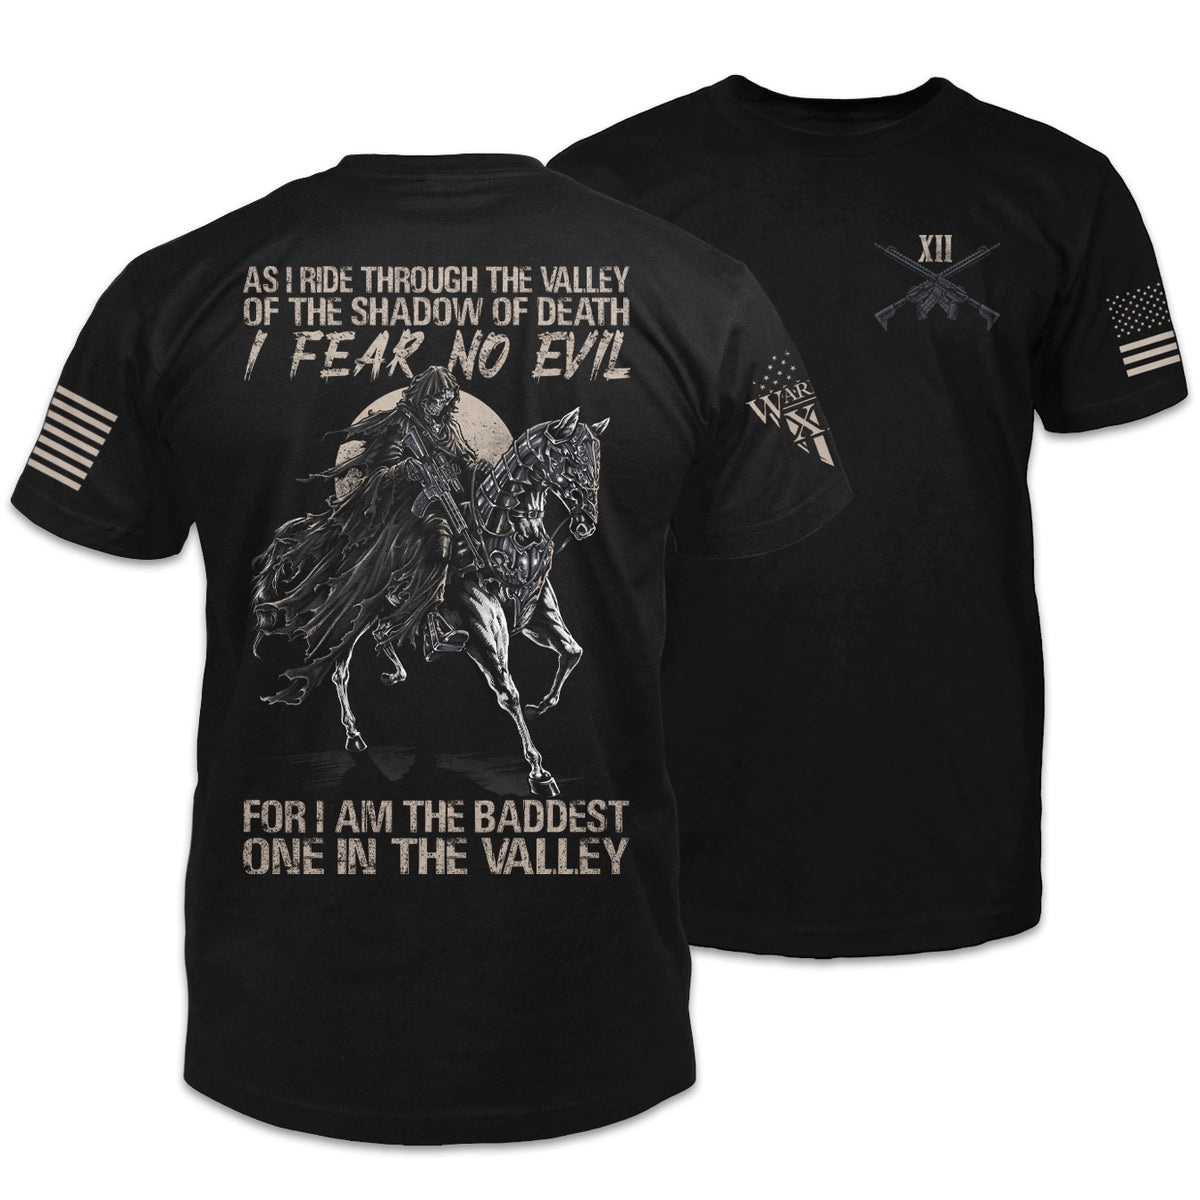 The front and back of a black t-shirt. The back of the shirt has an image of a grim reaper with an AR-15 on a horse with the words "As I ride through the valley of the shadow of death, I fear no evil, for I am the baddest one in the valley." The front of the shirt has a small pocket image of two crossed AR-15 rifles.